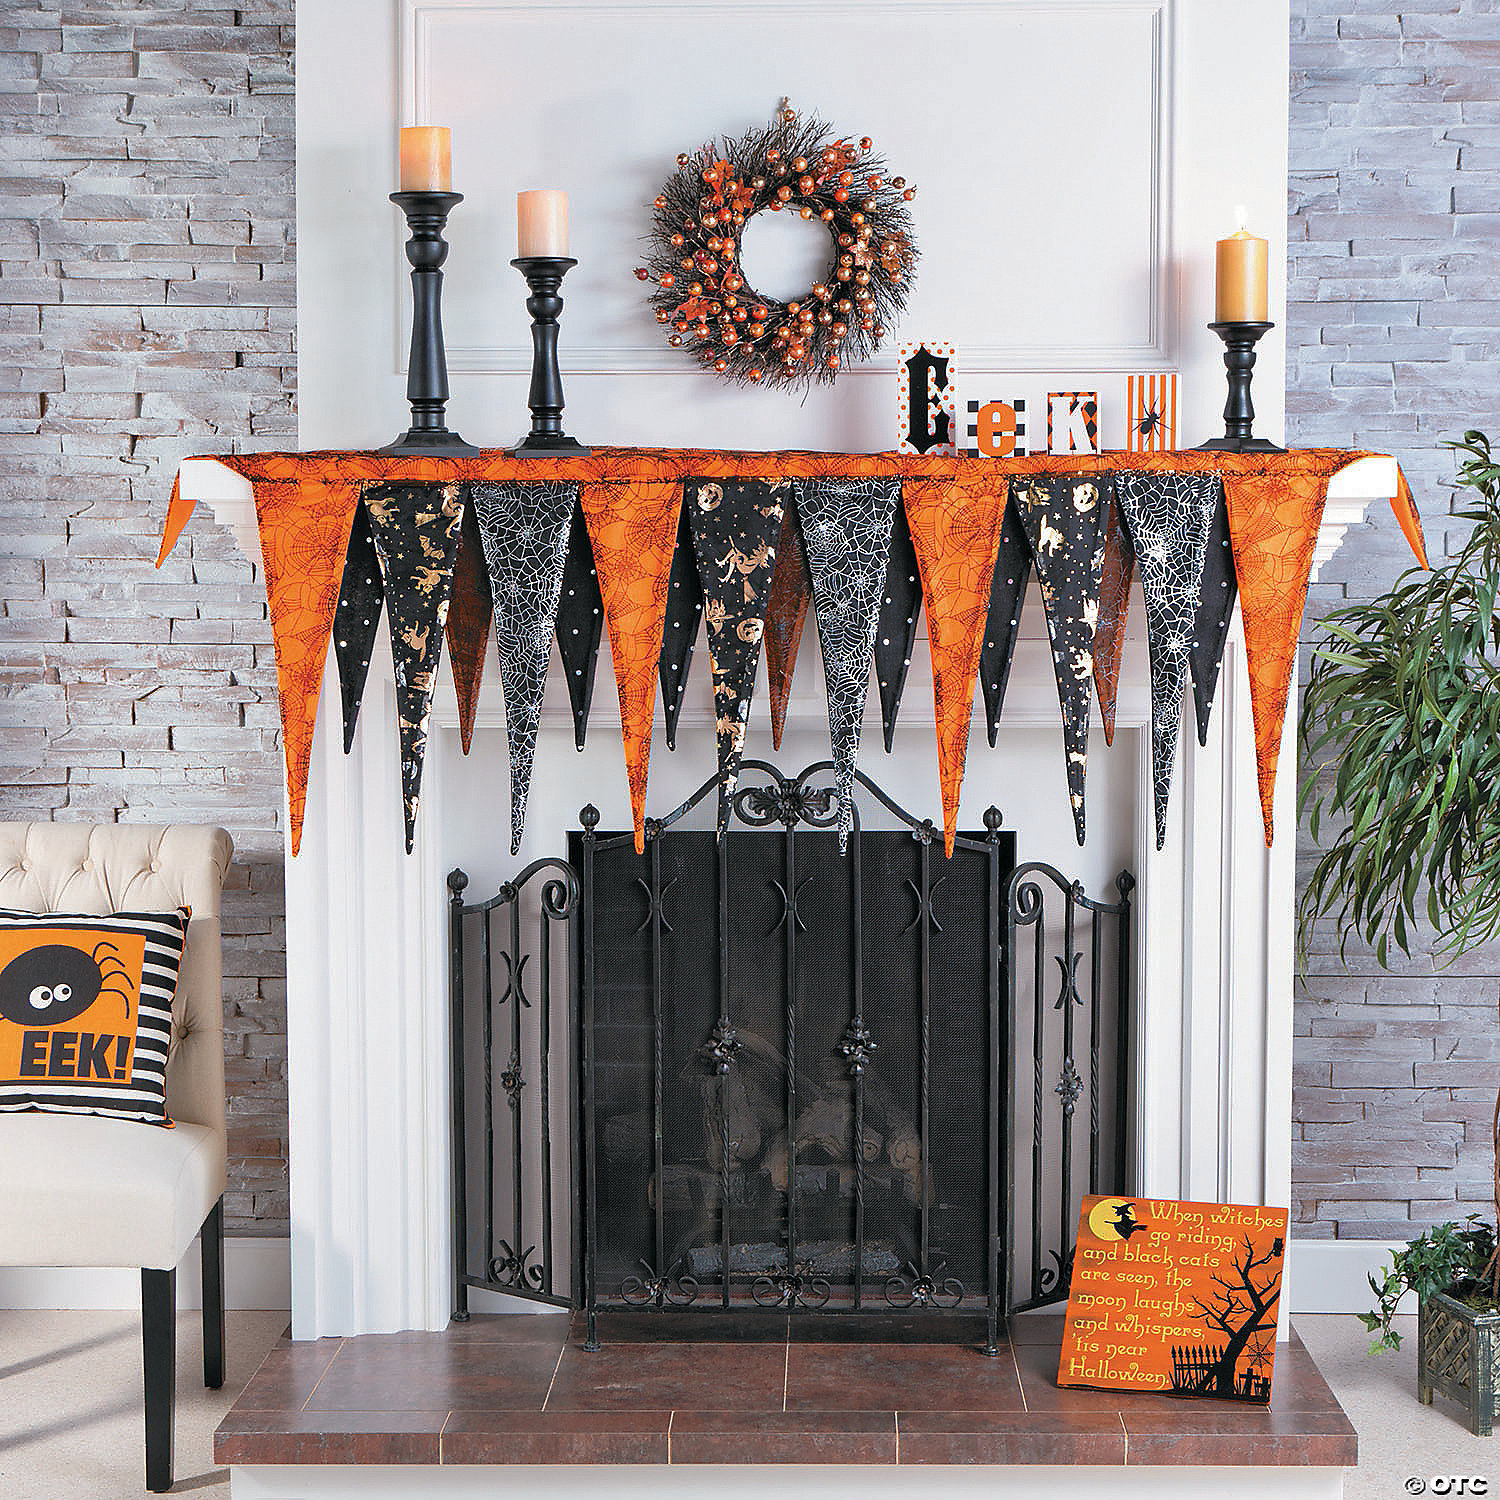 USA Lace~Frightful Halloween Pennant Banner Party Decor Mantel Scarf Swag Runner 